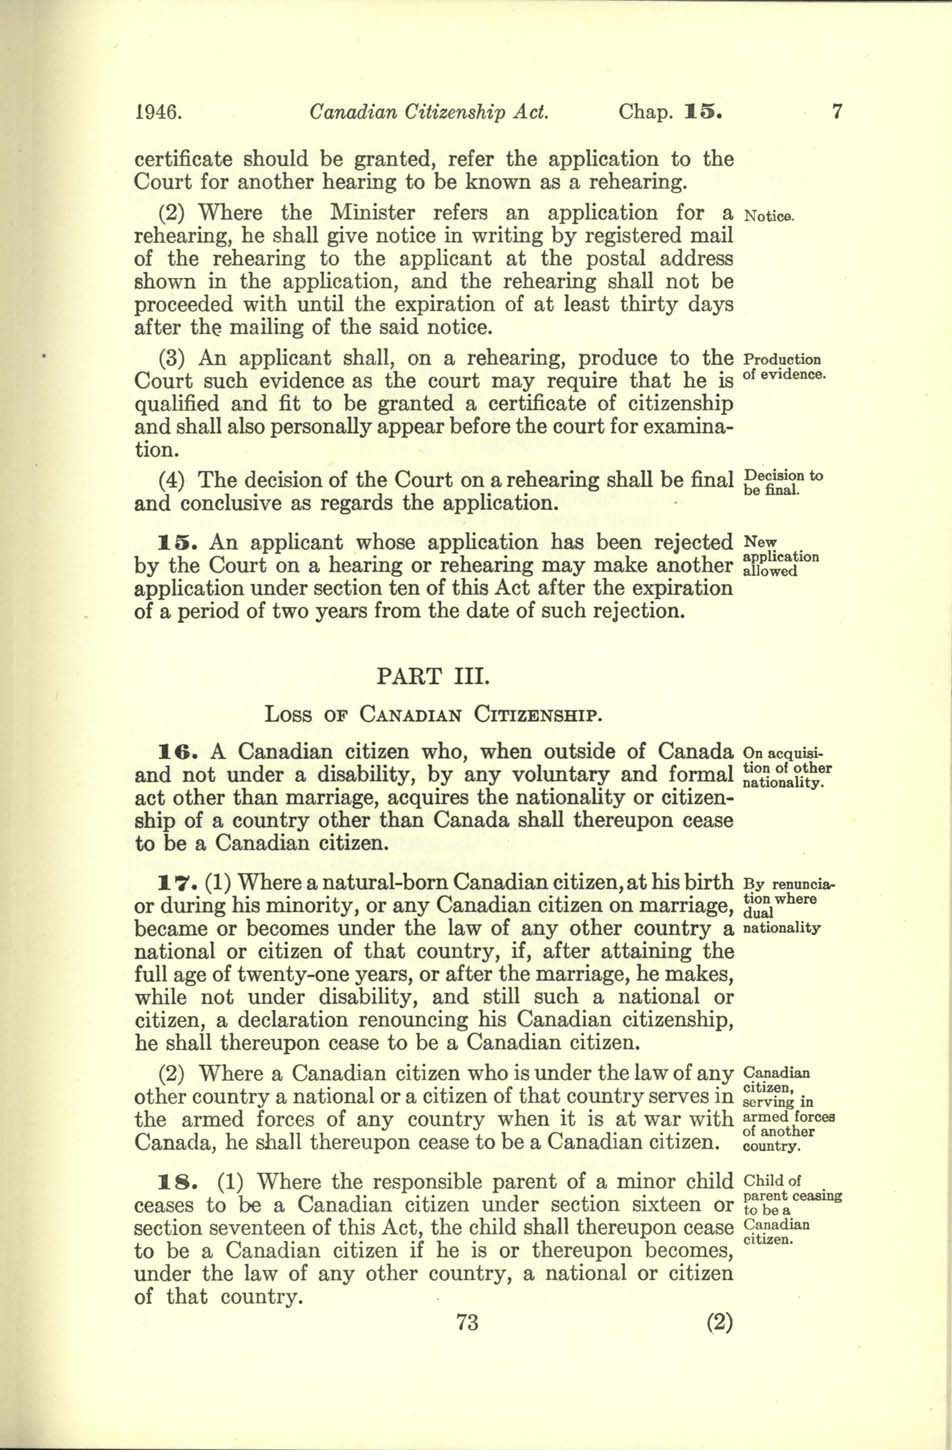 Chap 15 Page 73 Canadian Citizenship Act, 1947